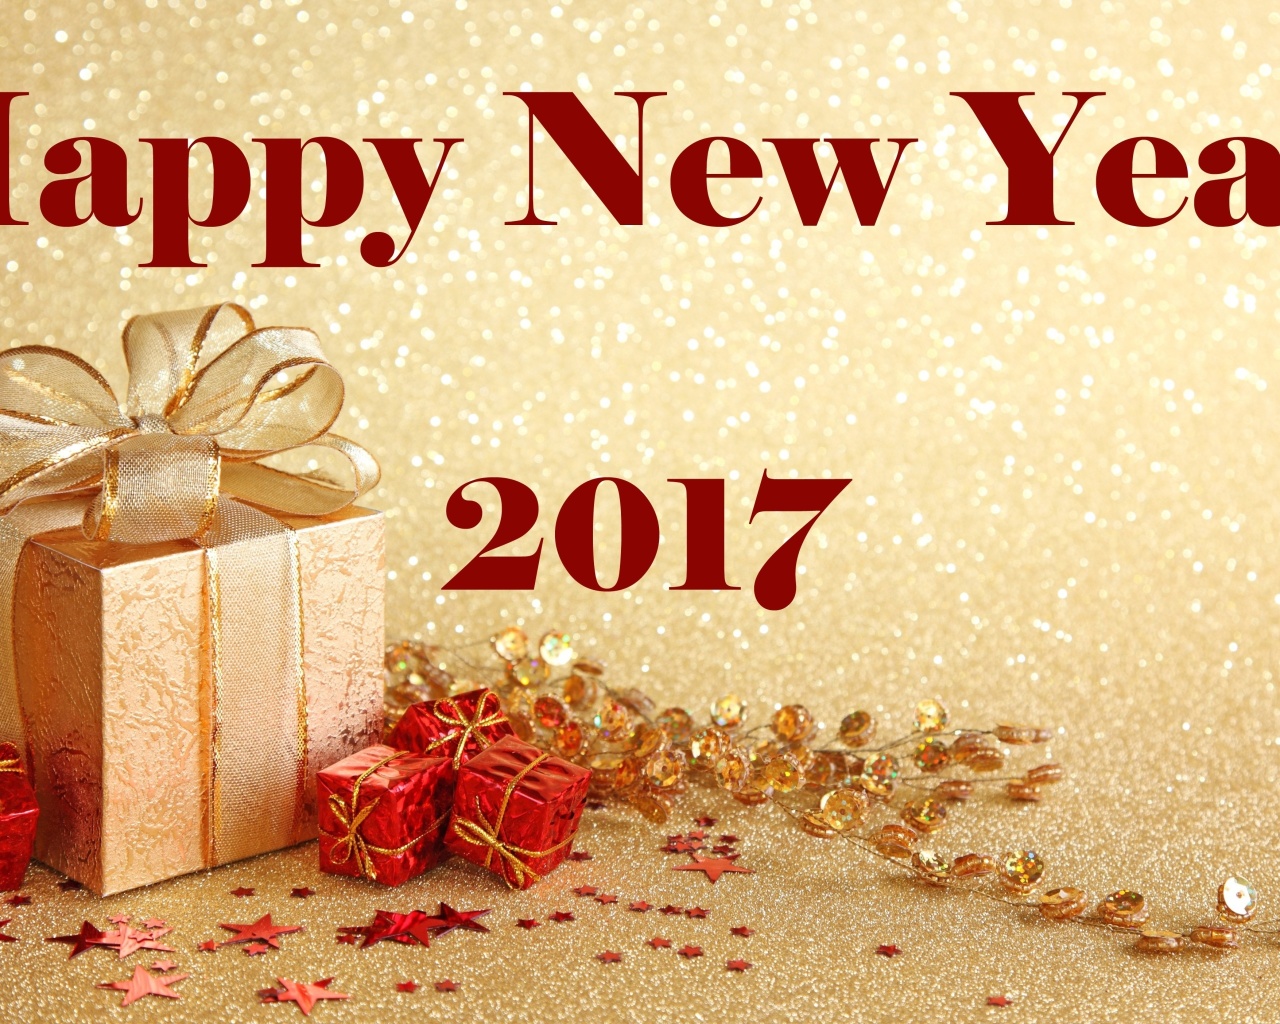 Happy New Year 2017 with Gifts wallpaper 1280x1024